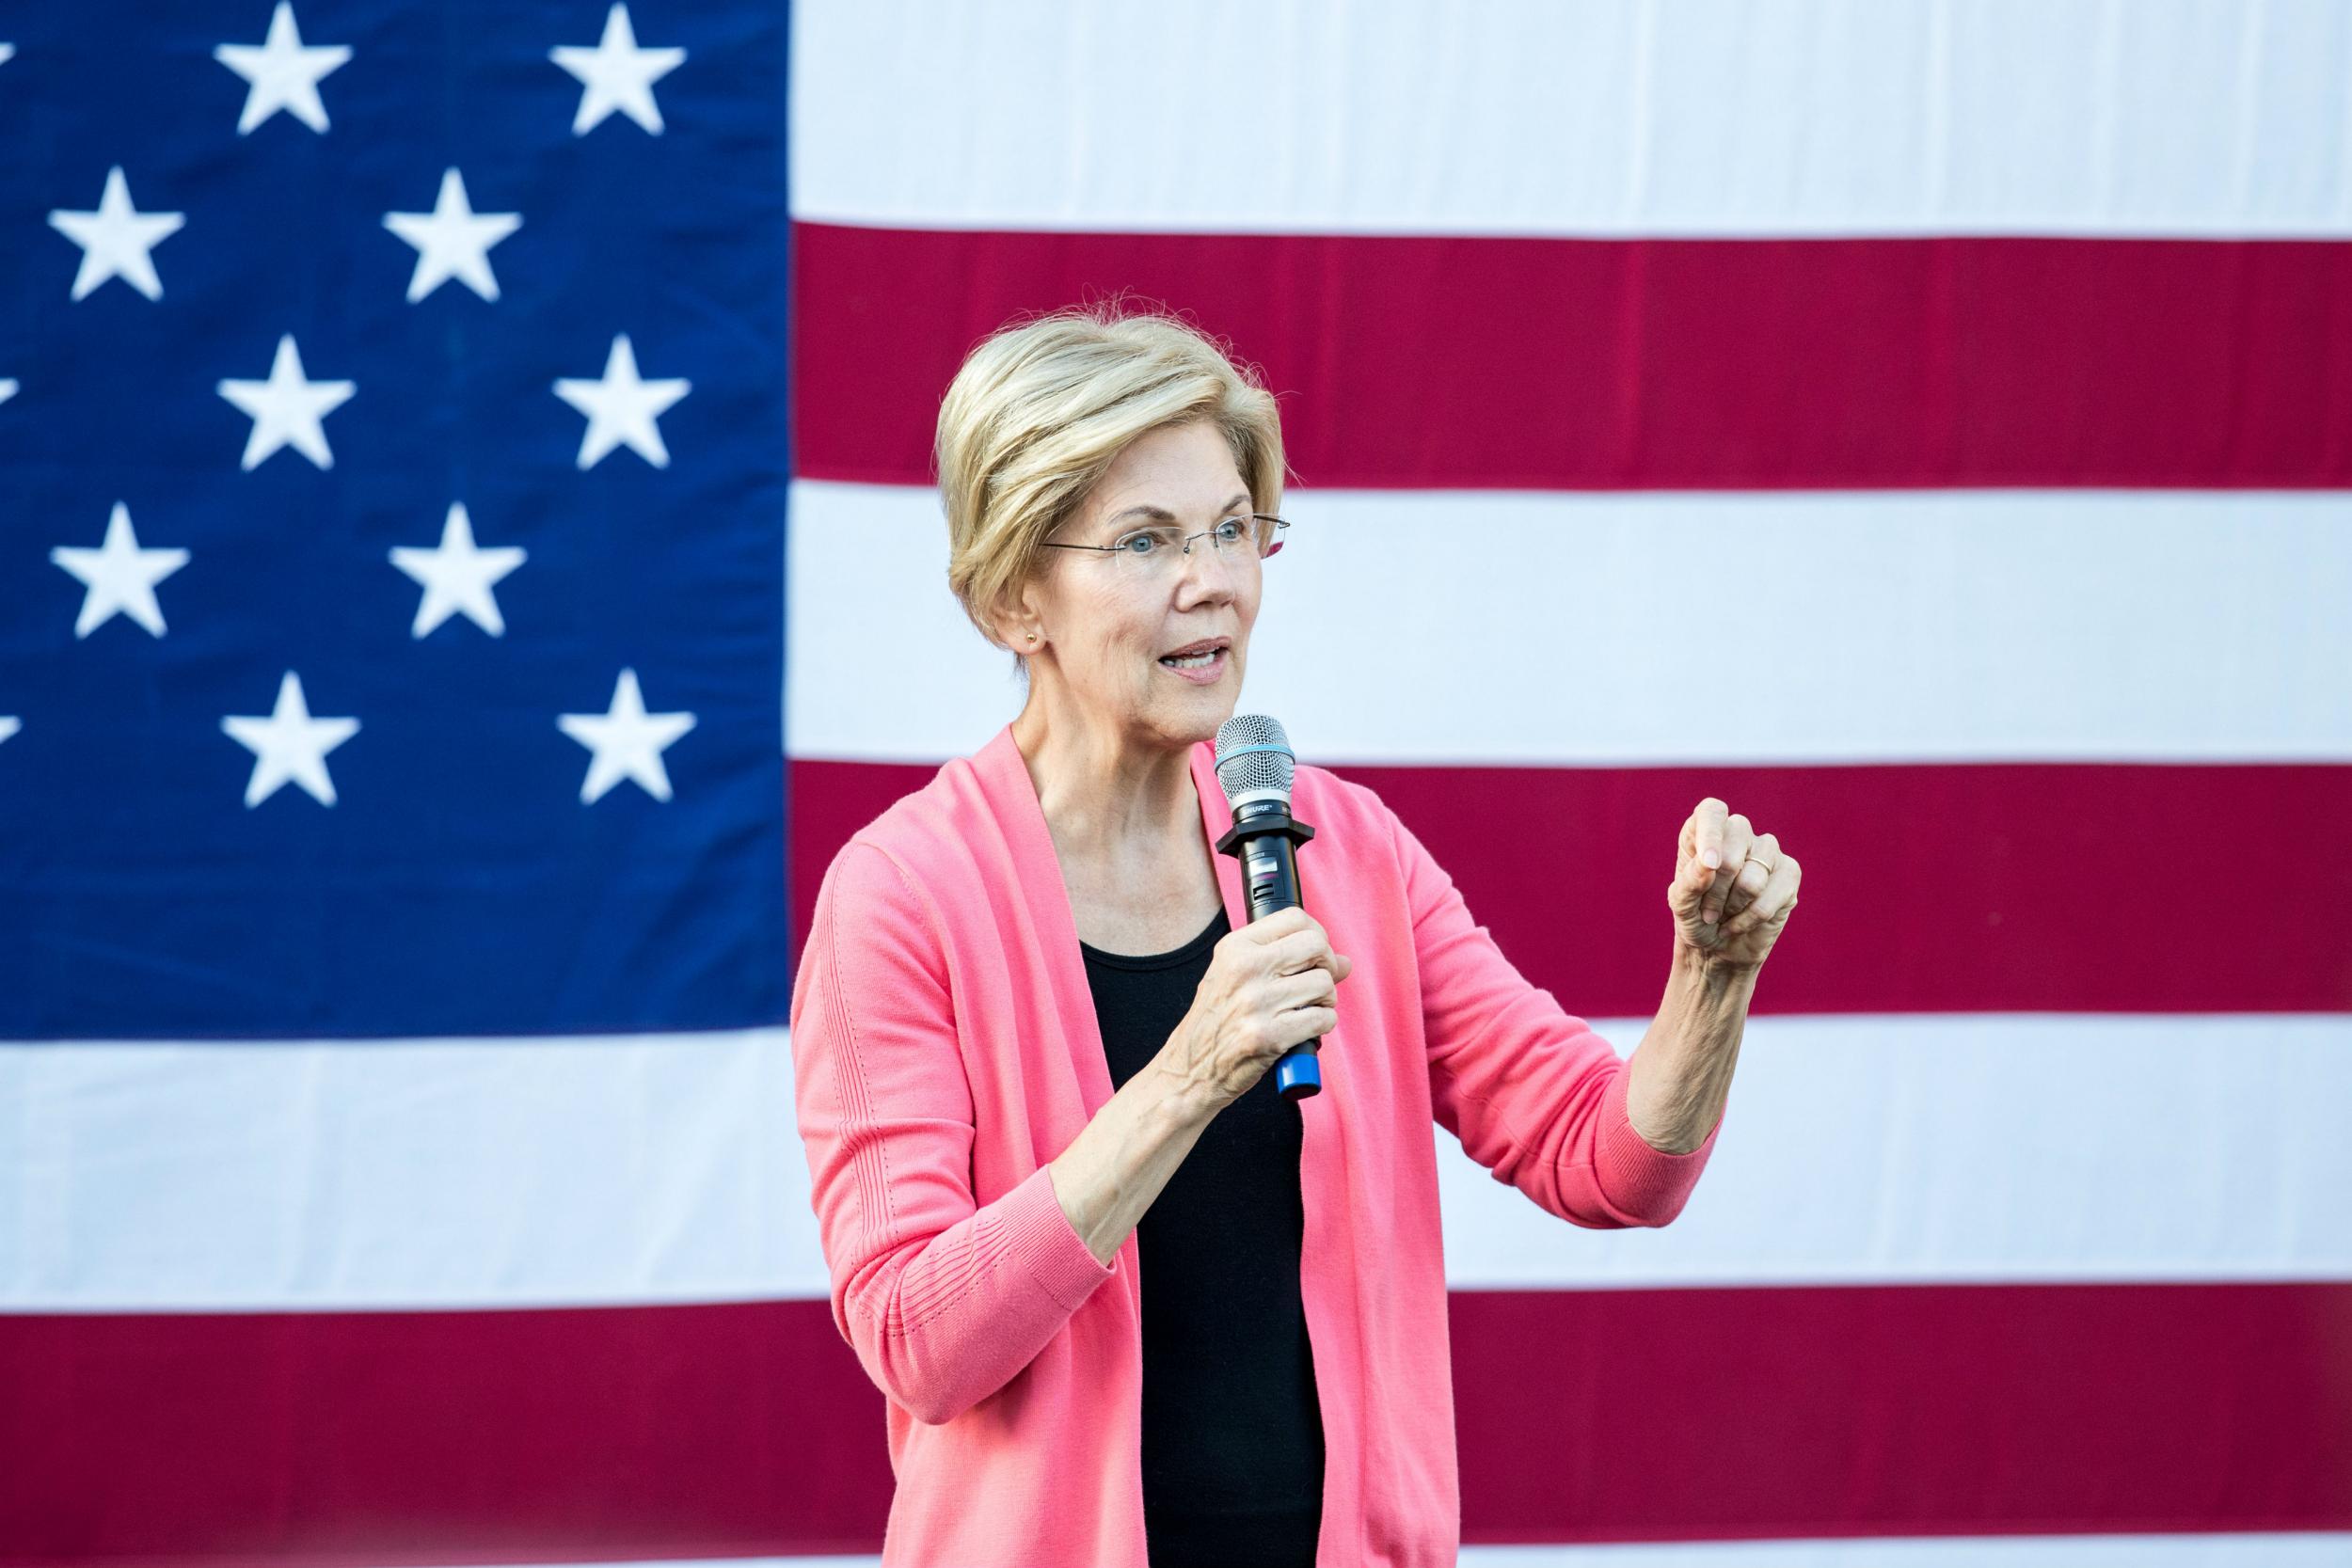 The latest polls put Ms Warren ahead of her democratic rivals in the race for the White House